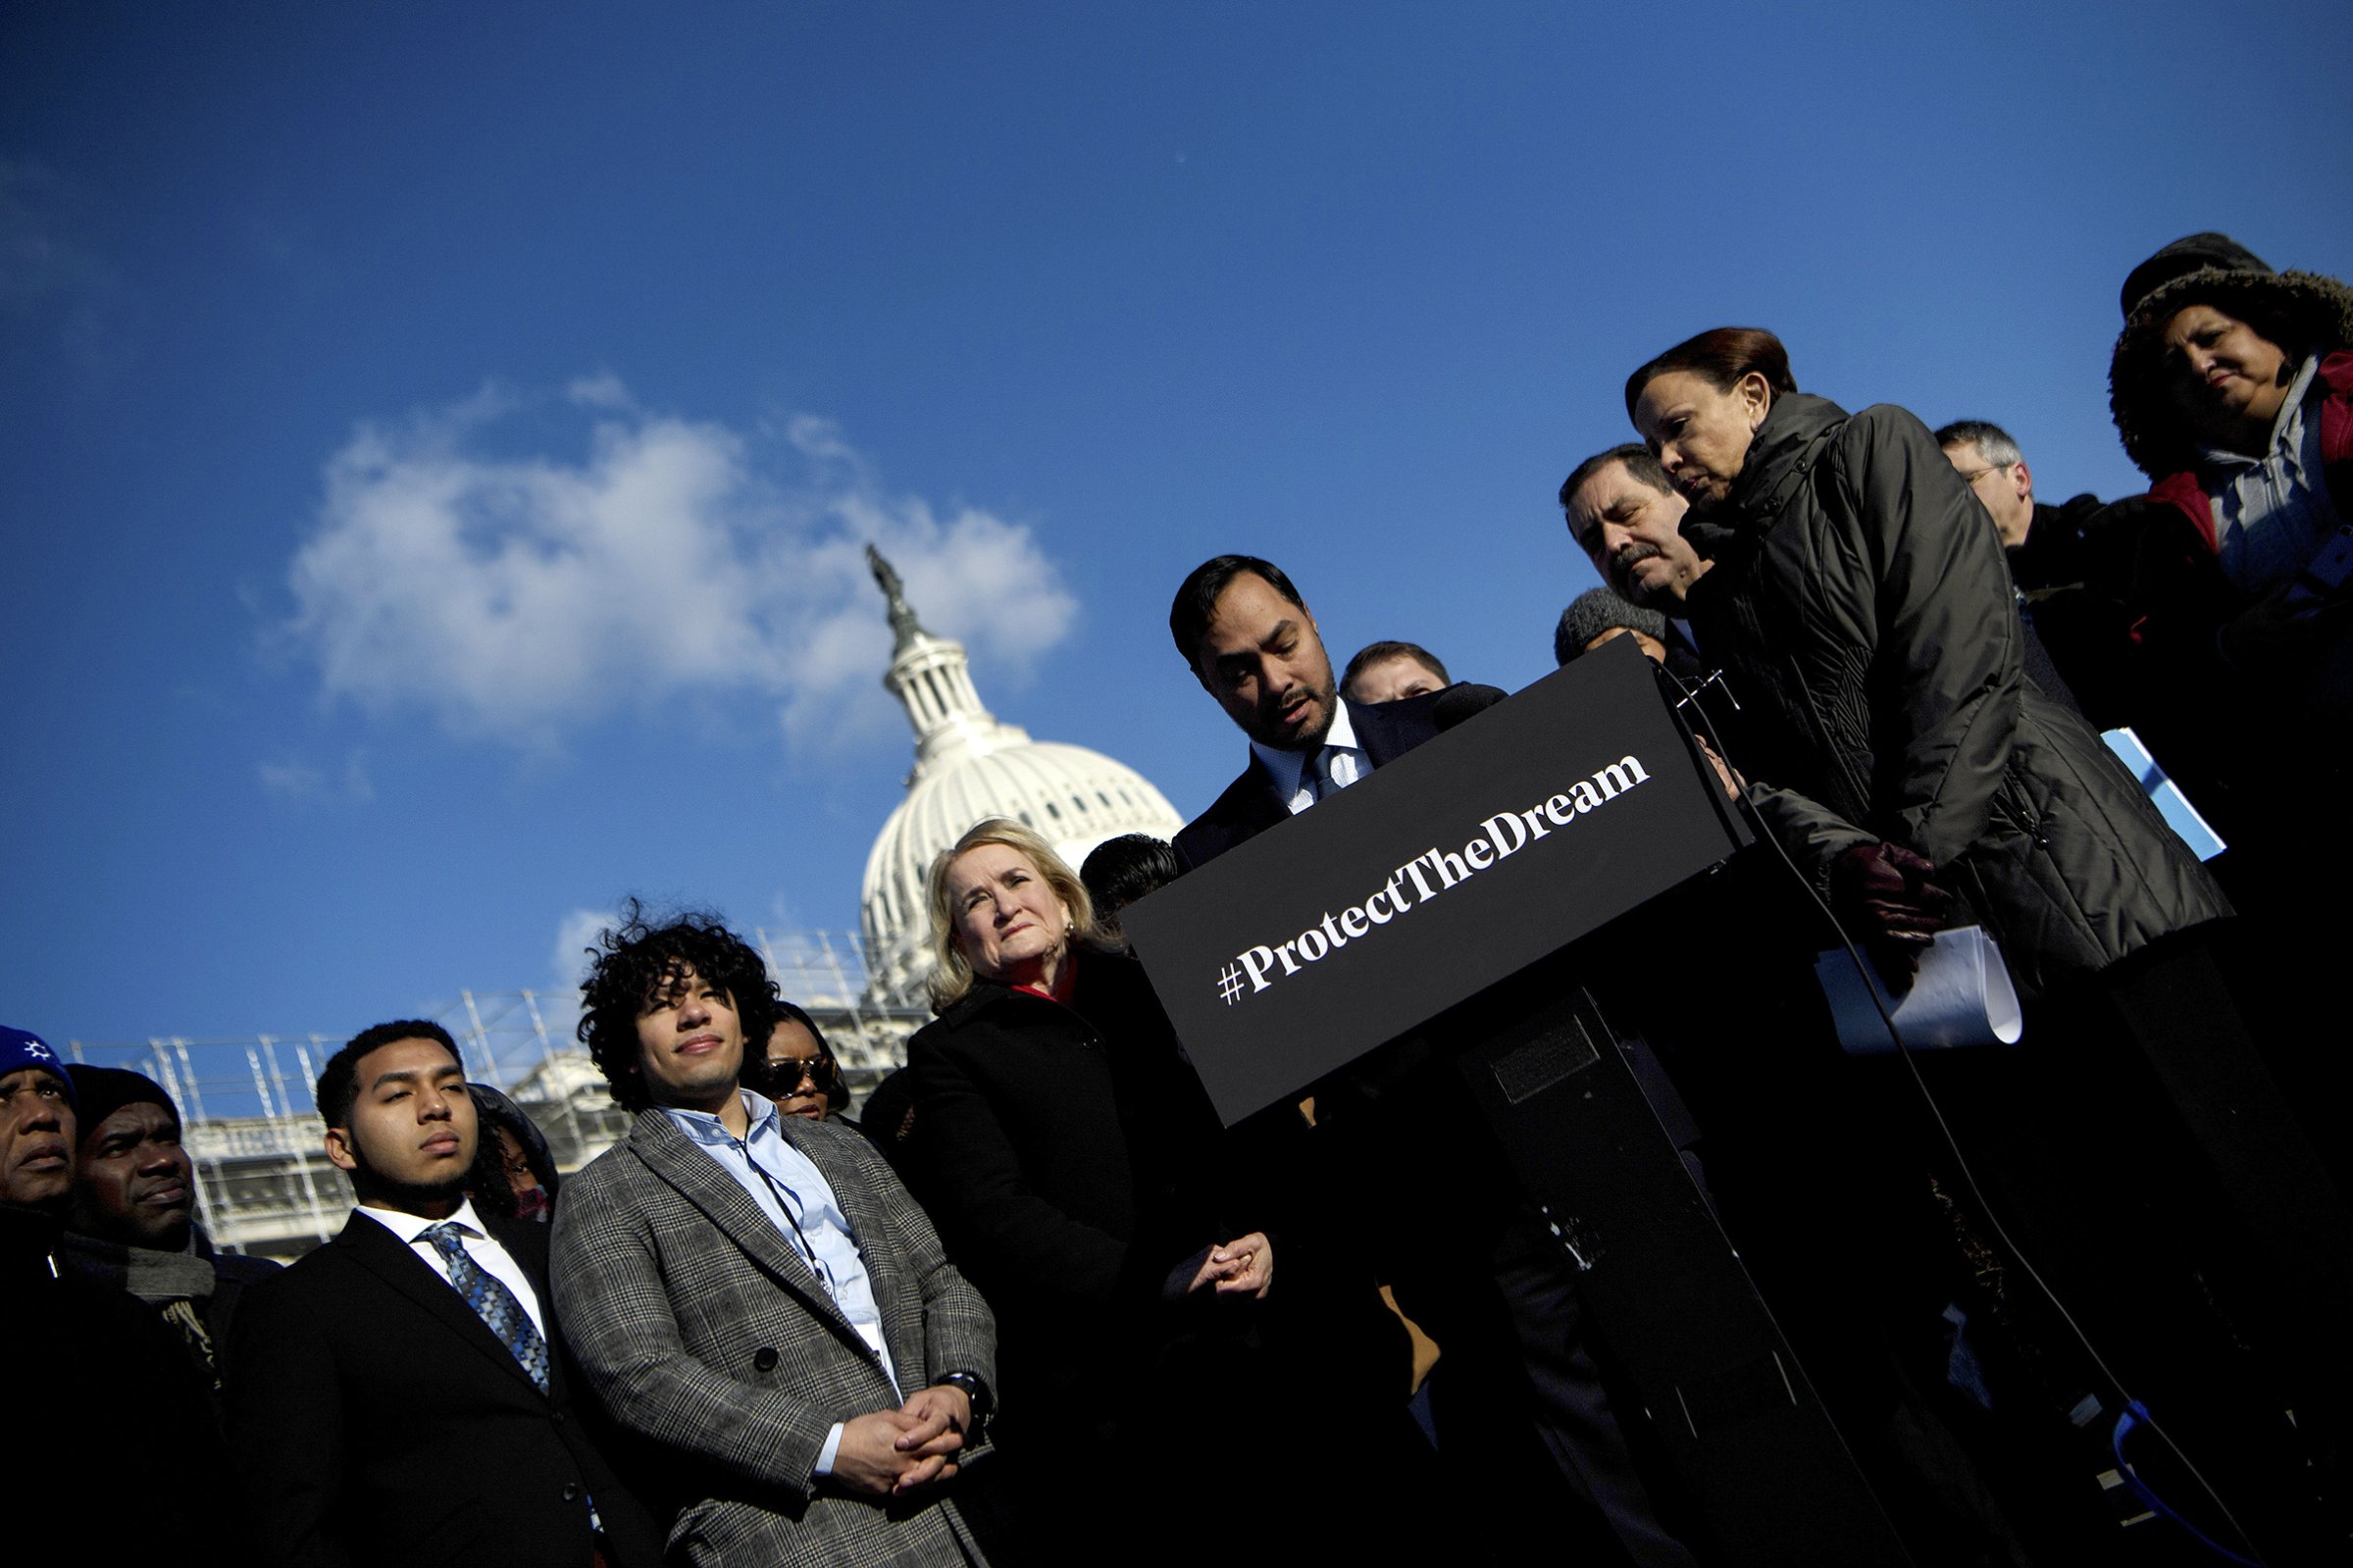 Texas Representative Joaquin Castro and others participate in an event with DACA (Deferred Action for Childhood Arrivals), TPS (Temporary Protected Status), and DED (Deferred Enforced Departure) recipients on March 6 in Washington, DC.